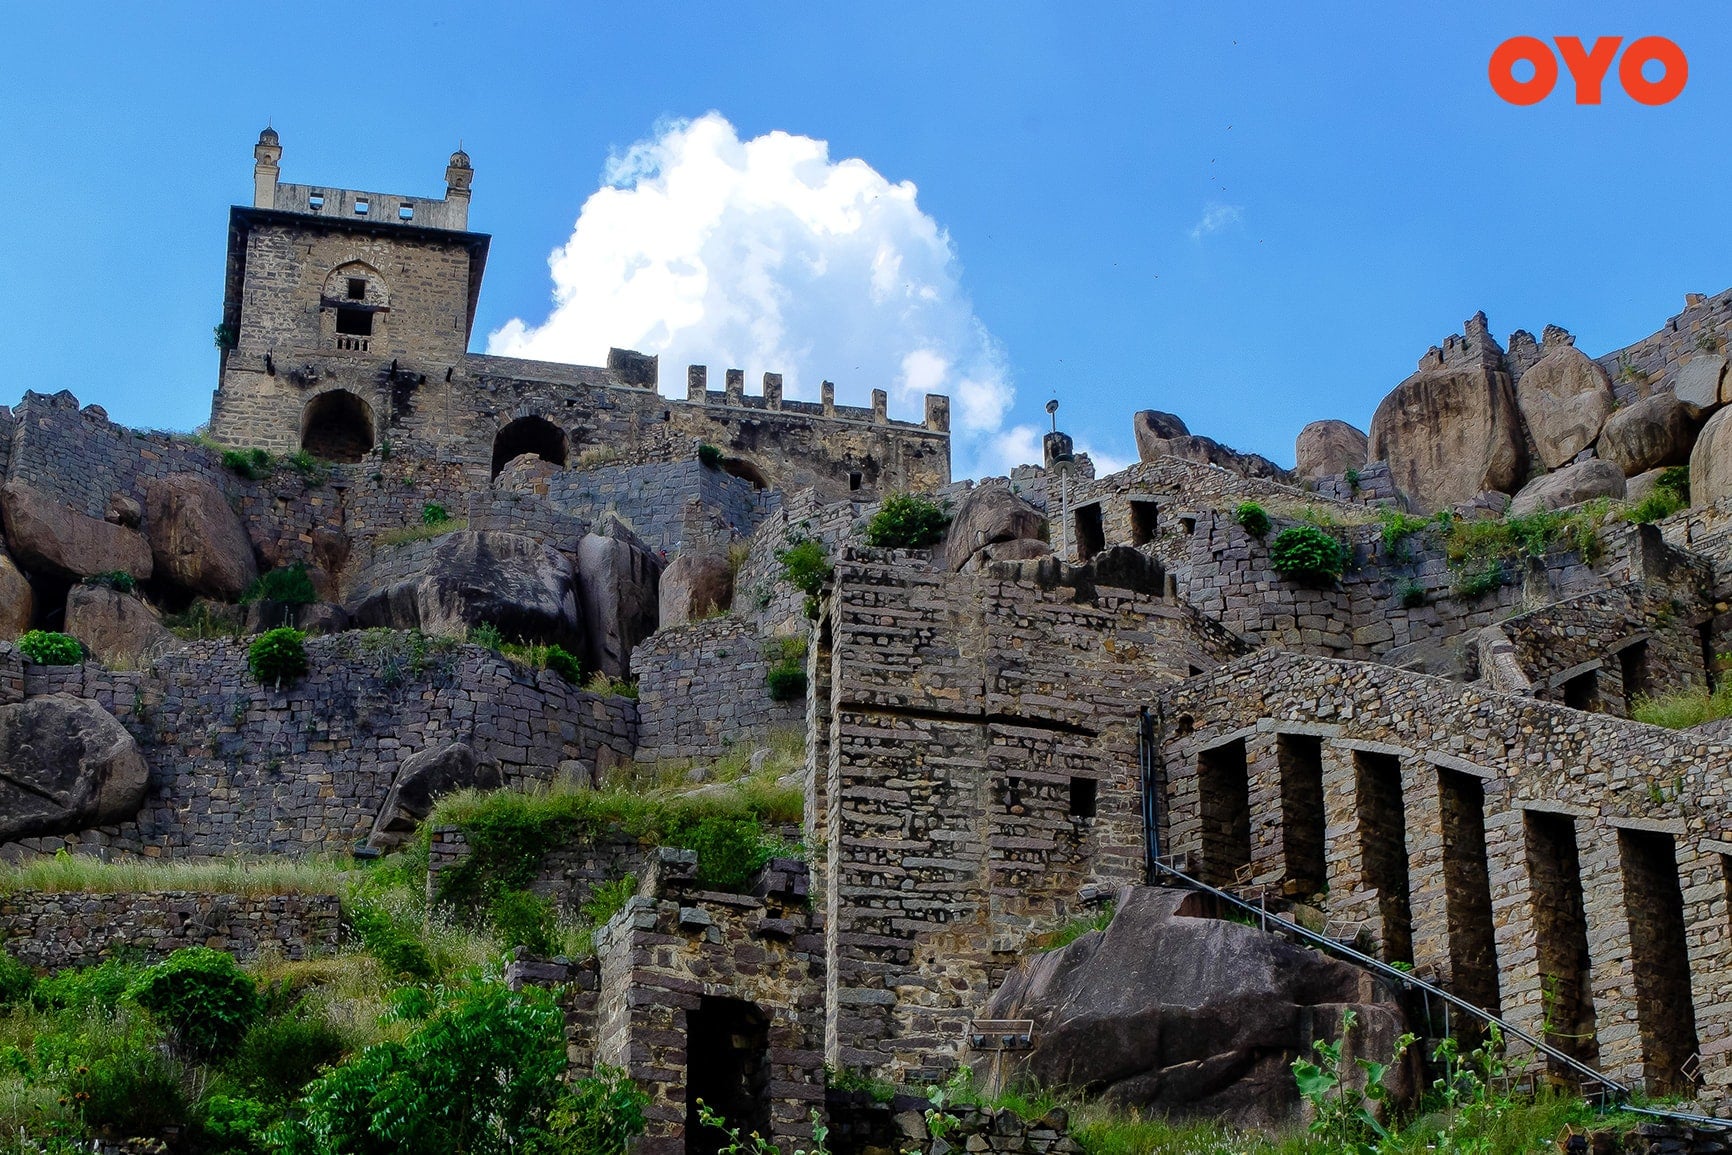 Famous Forts in India